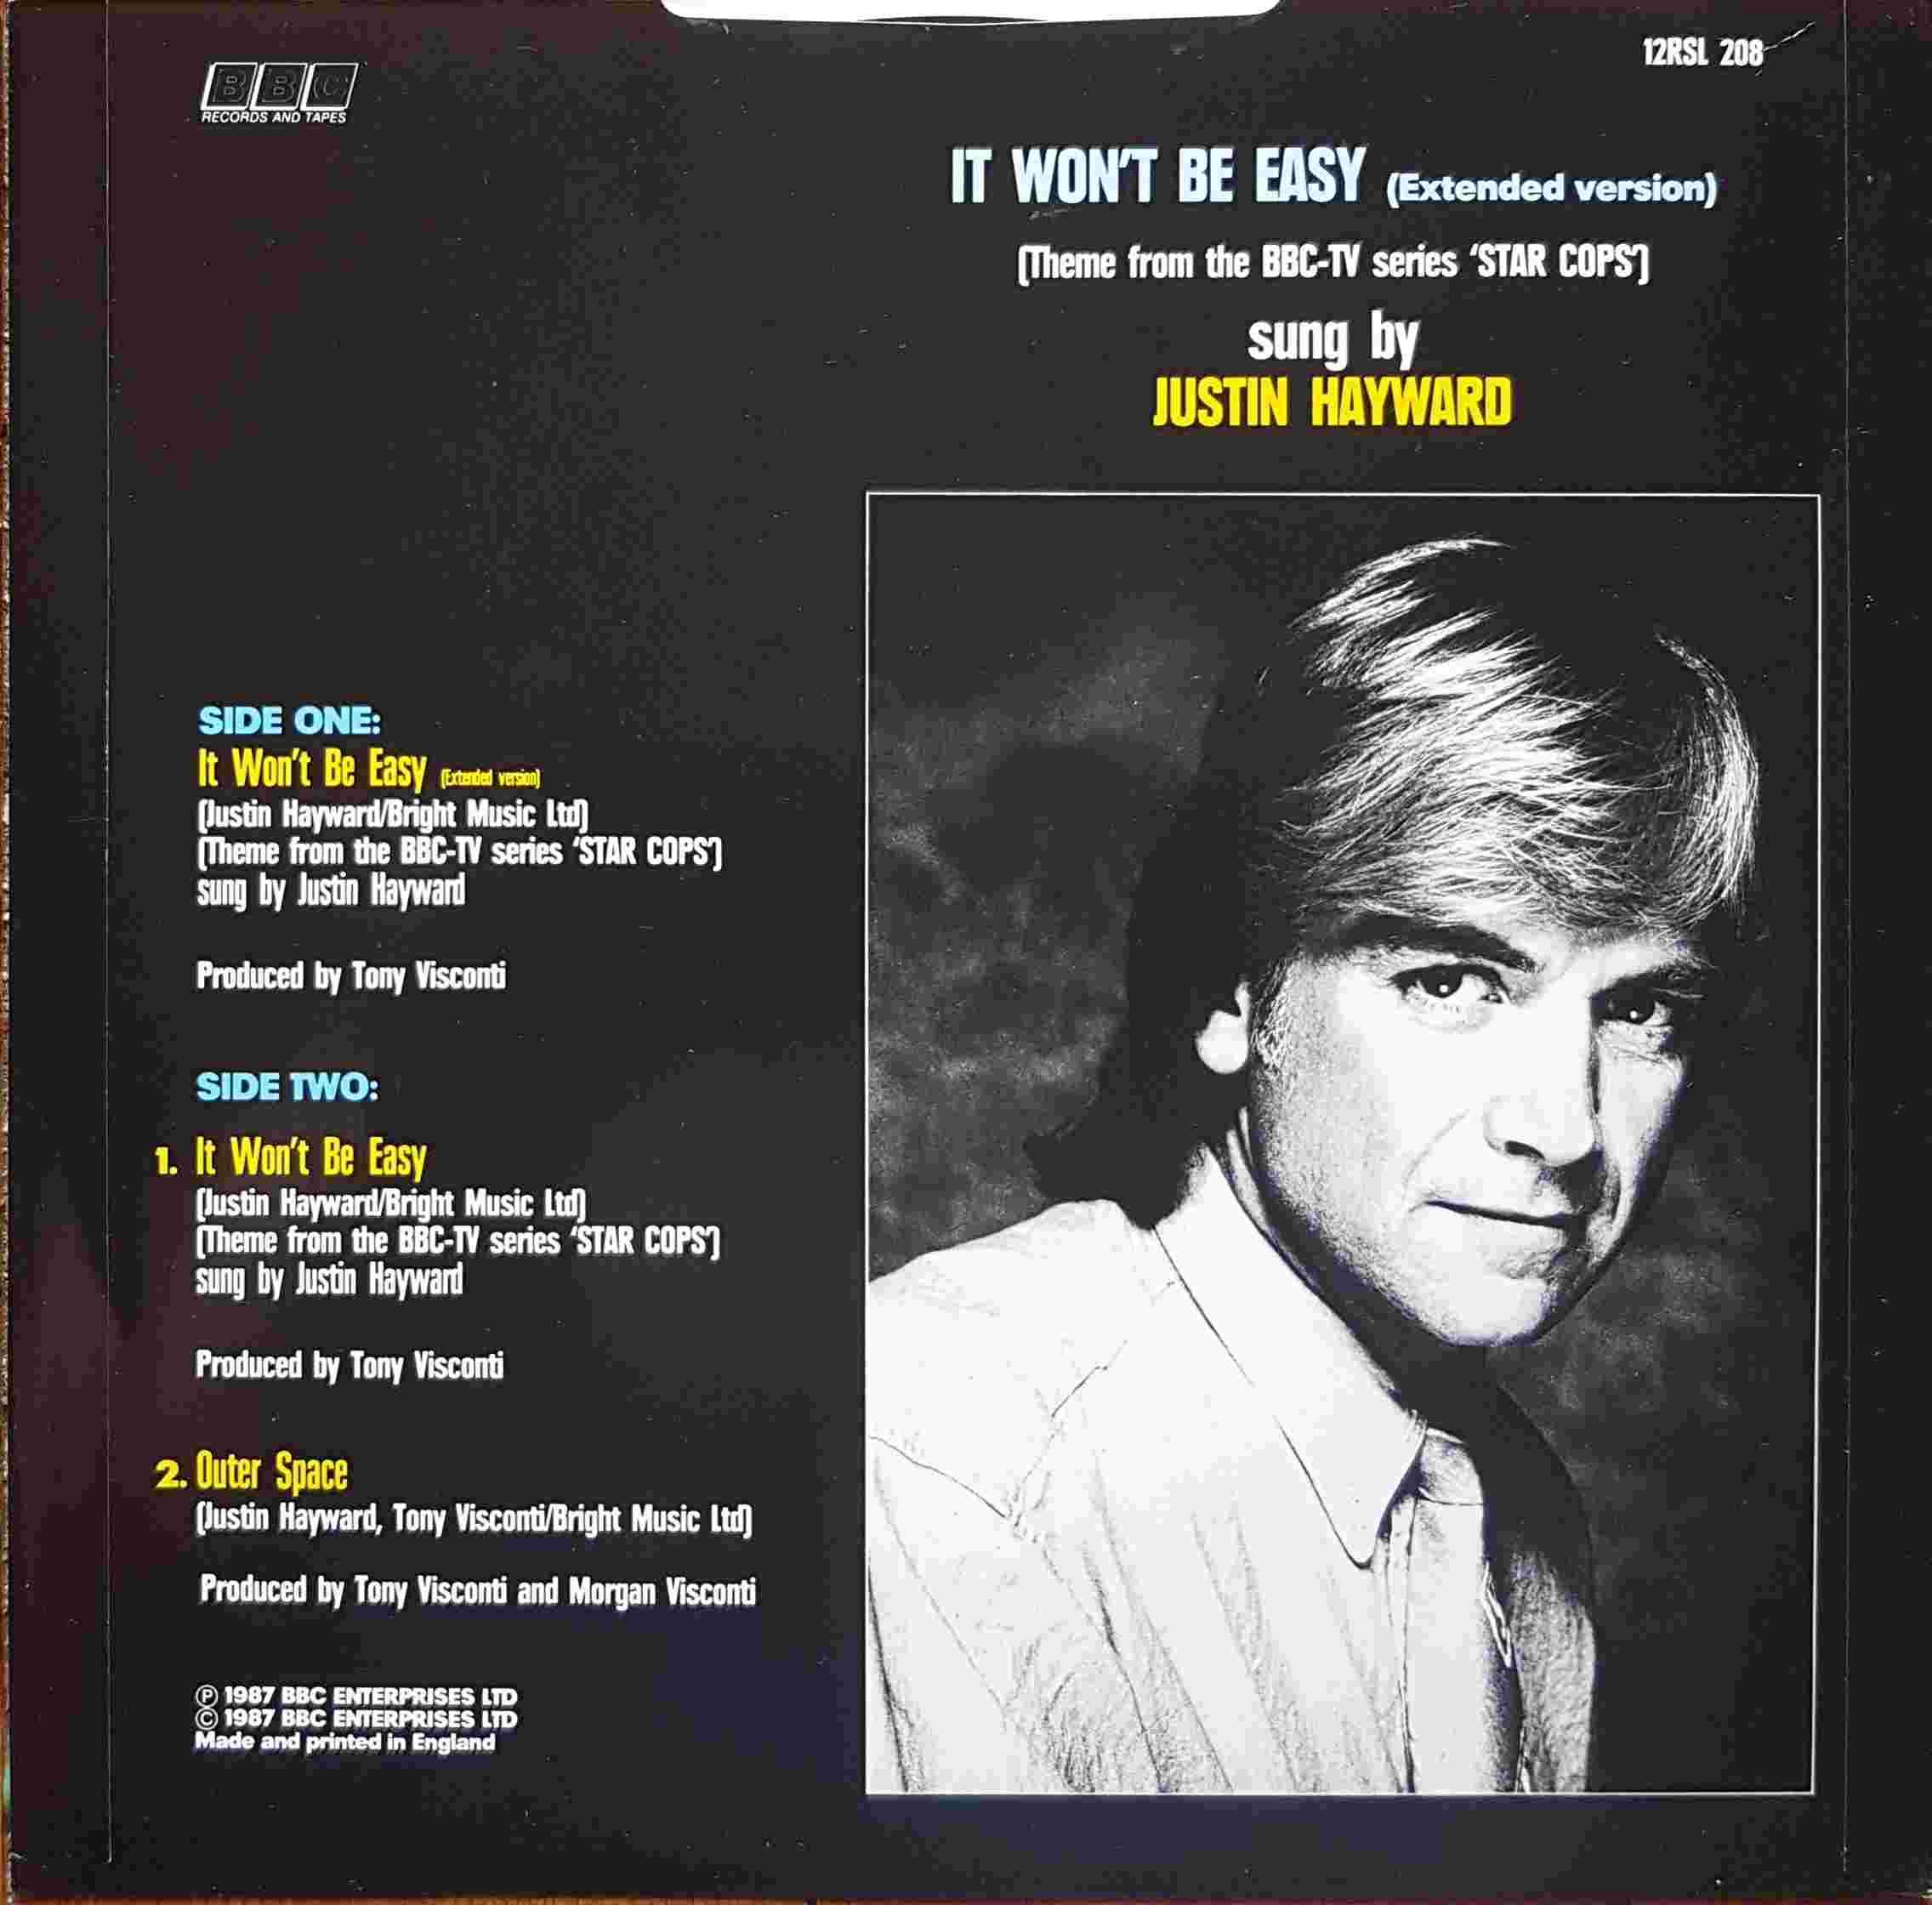 Picture of 12 RSL 208 It won't be easy (Star cops) by artist Justin Hayward / Tony Visconti from the BBC records and Tapes library